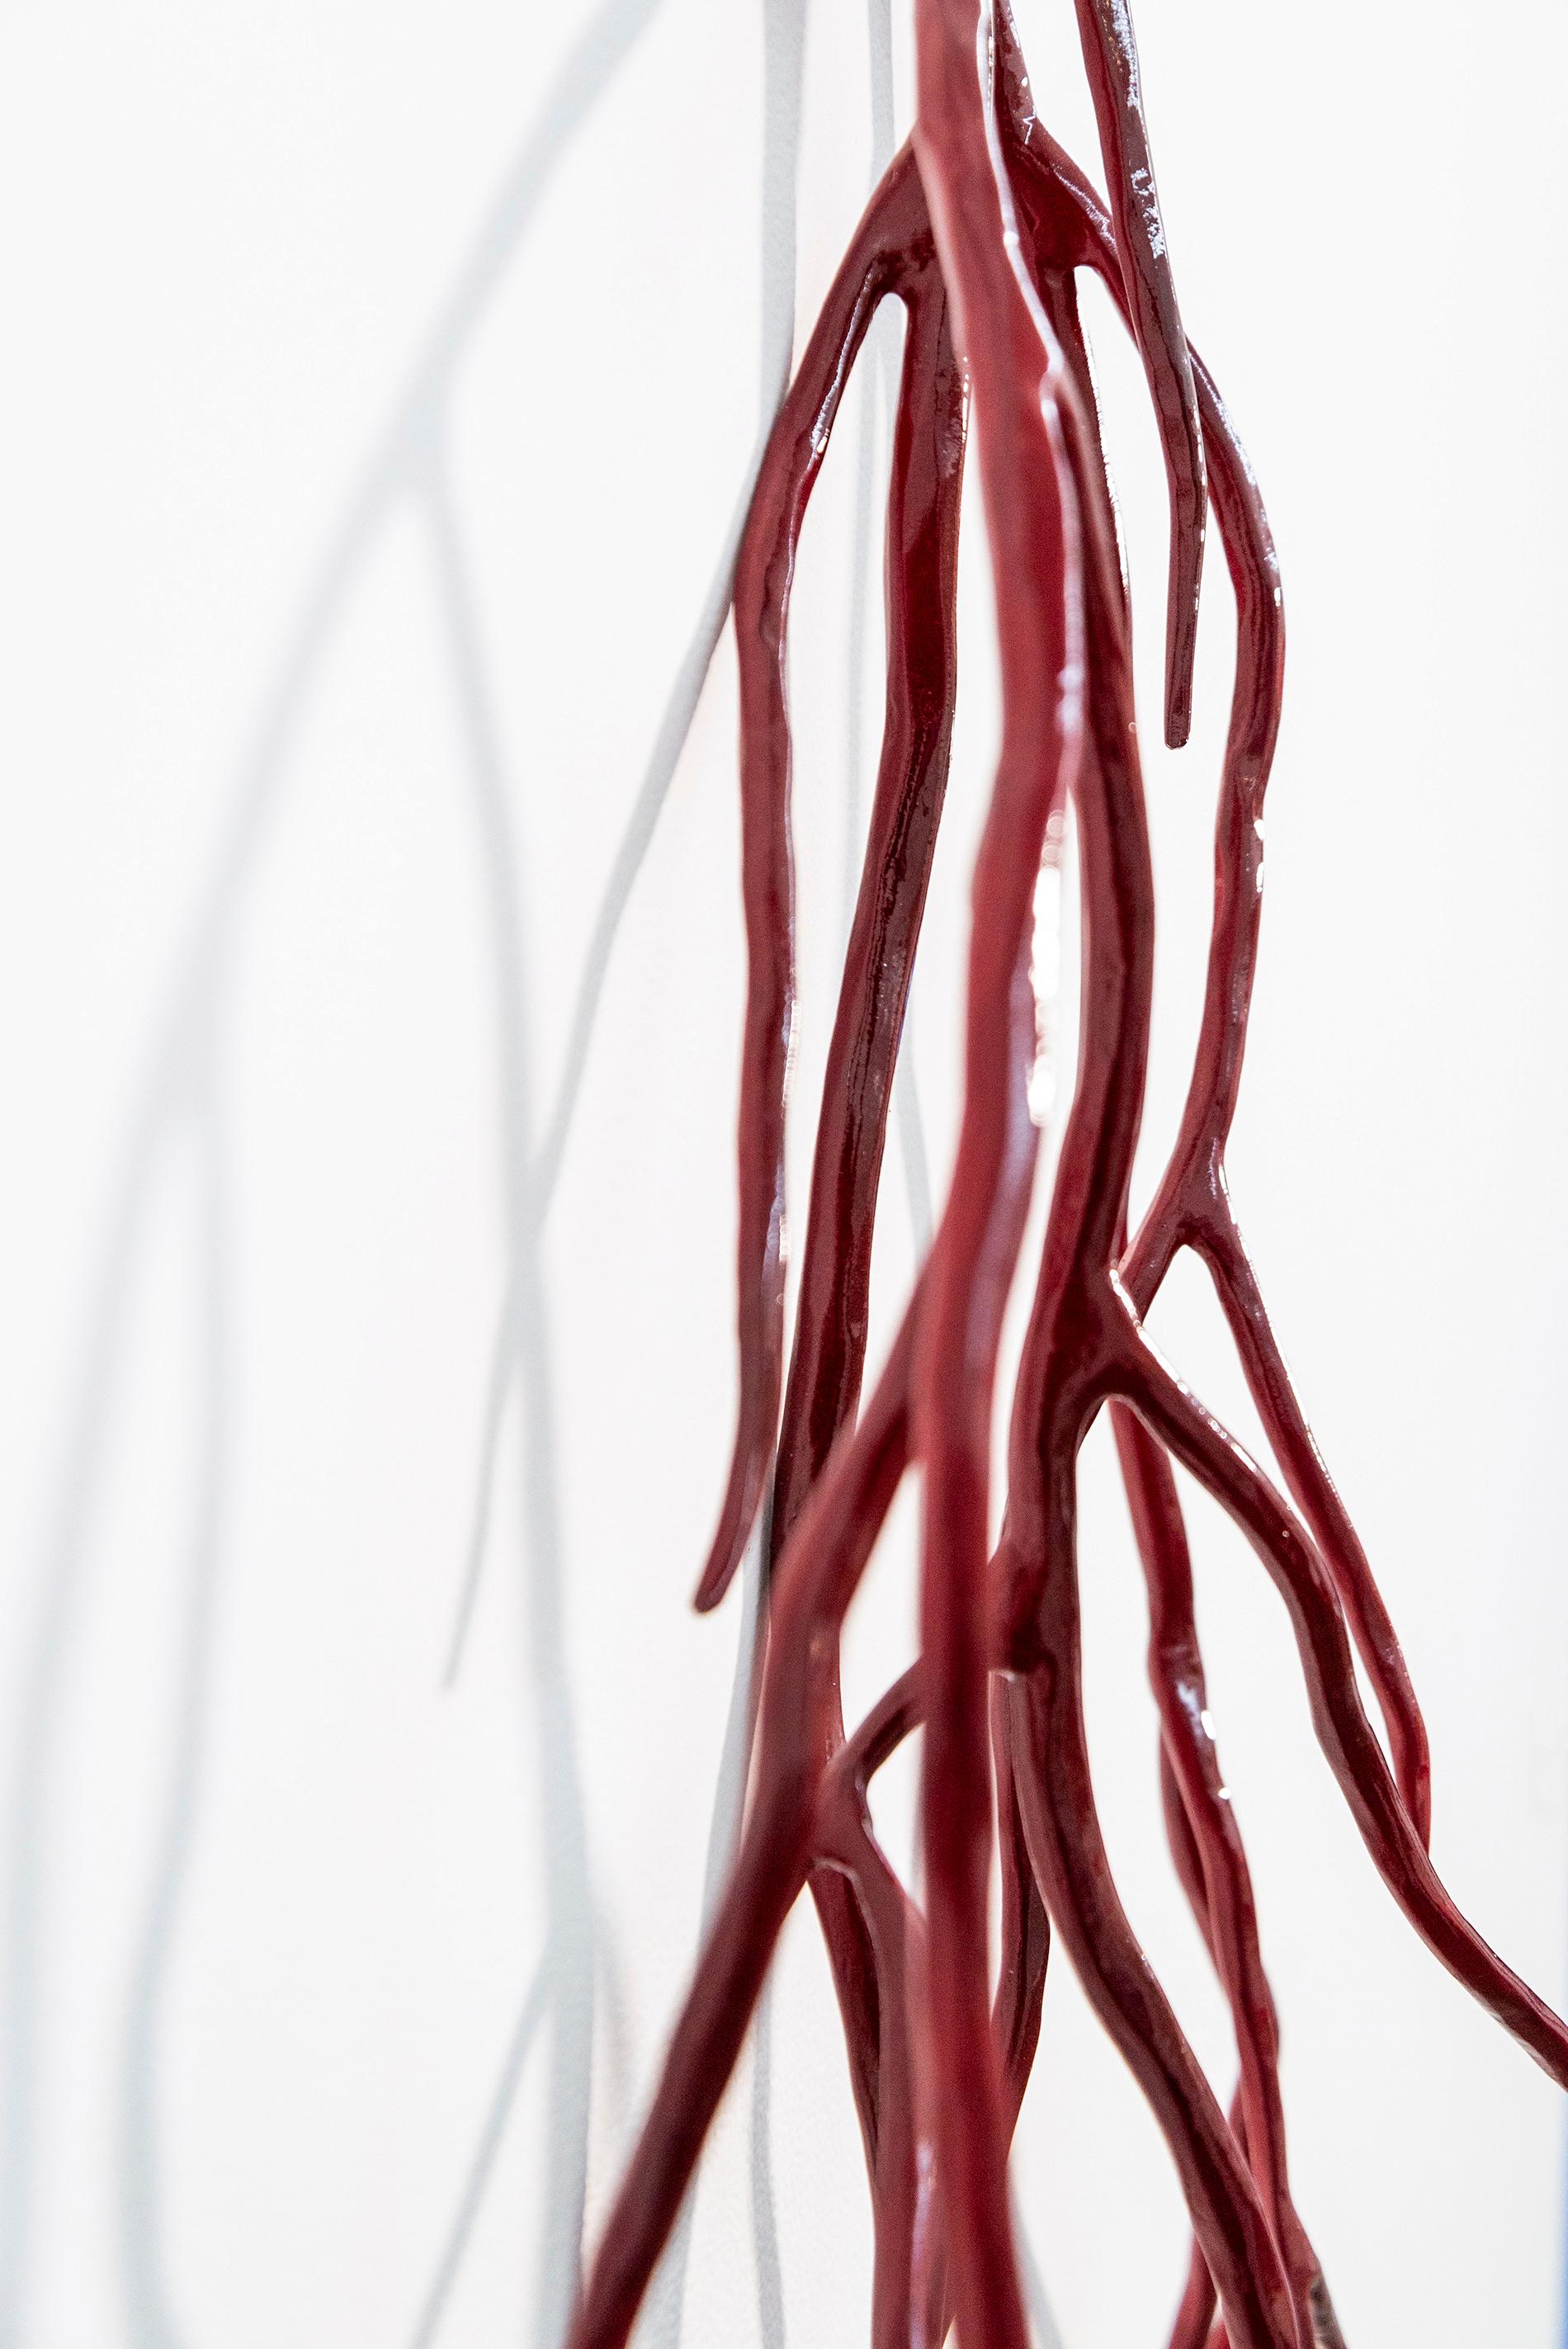 Red Bough - bright, contemporary, powder coated steel, wall sculpture For Sale 5